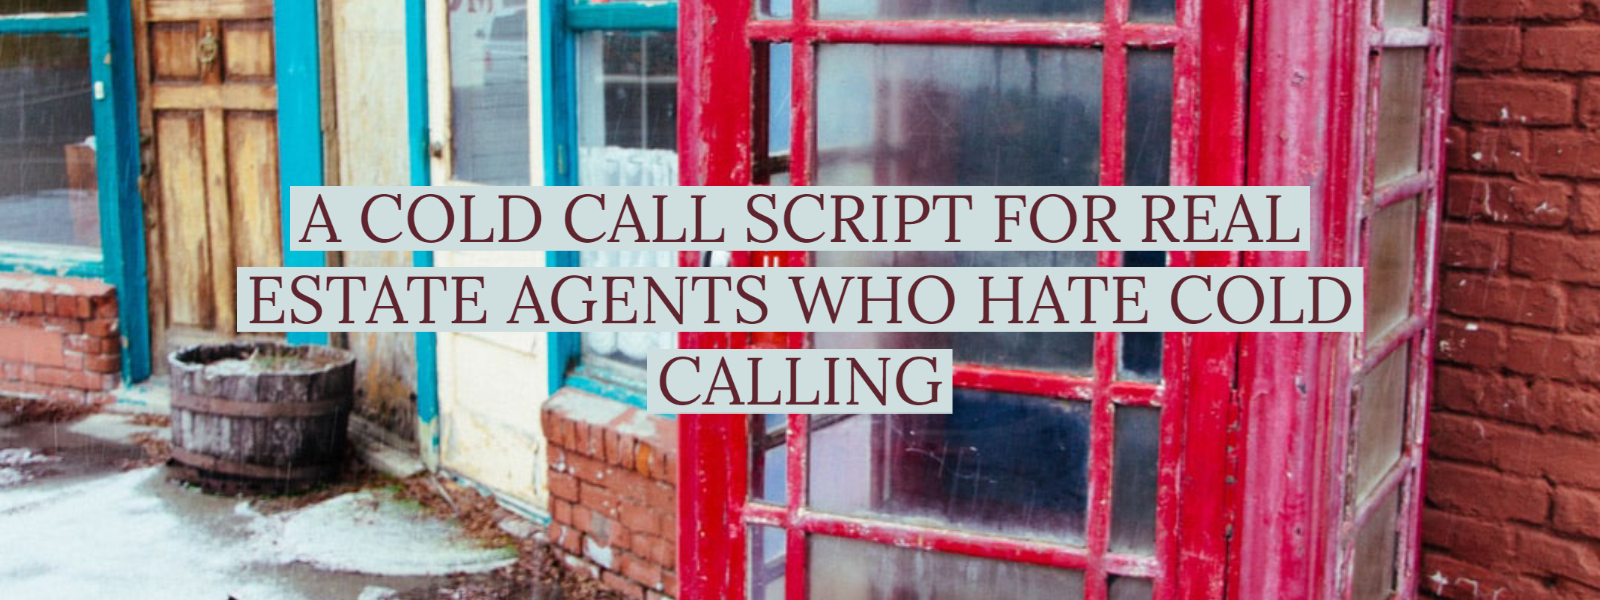 A COLD CALL SCRIPT FOR REAL ESTATE AGENTS WHO HATE COLD CALLING